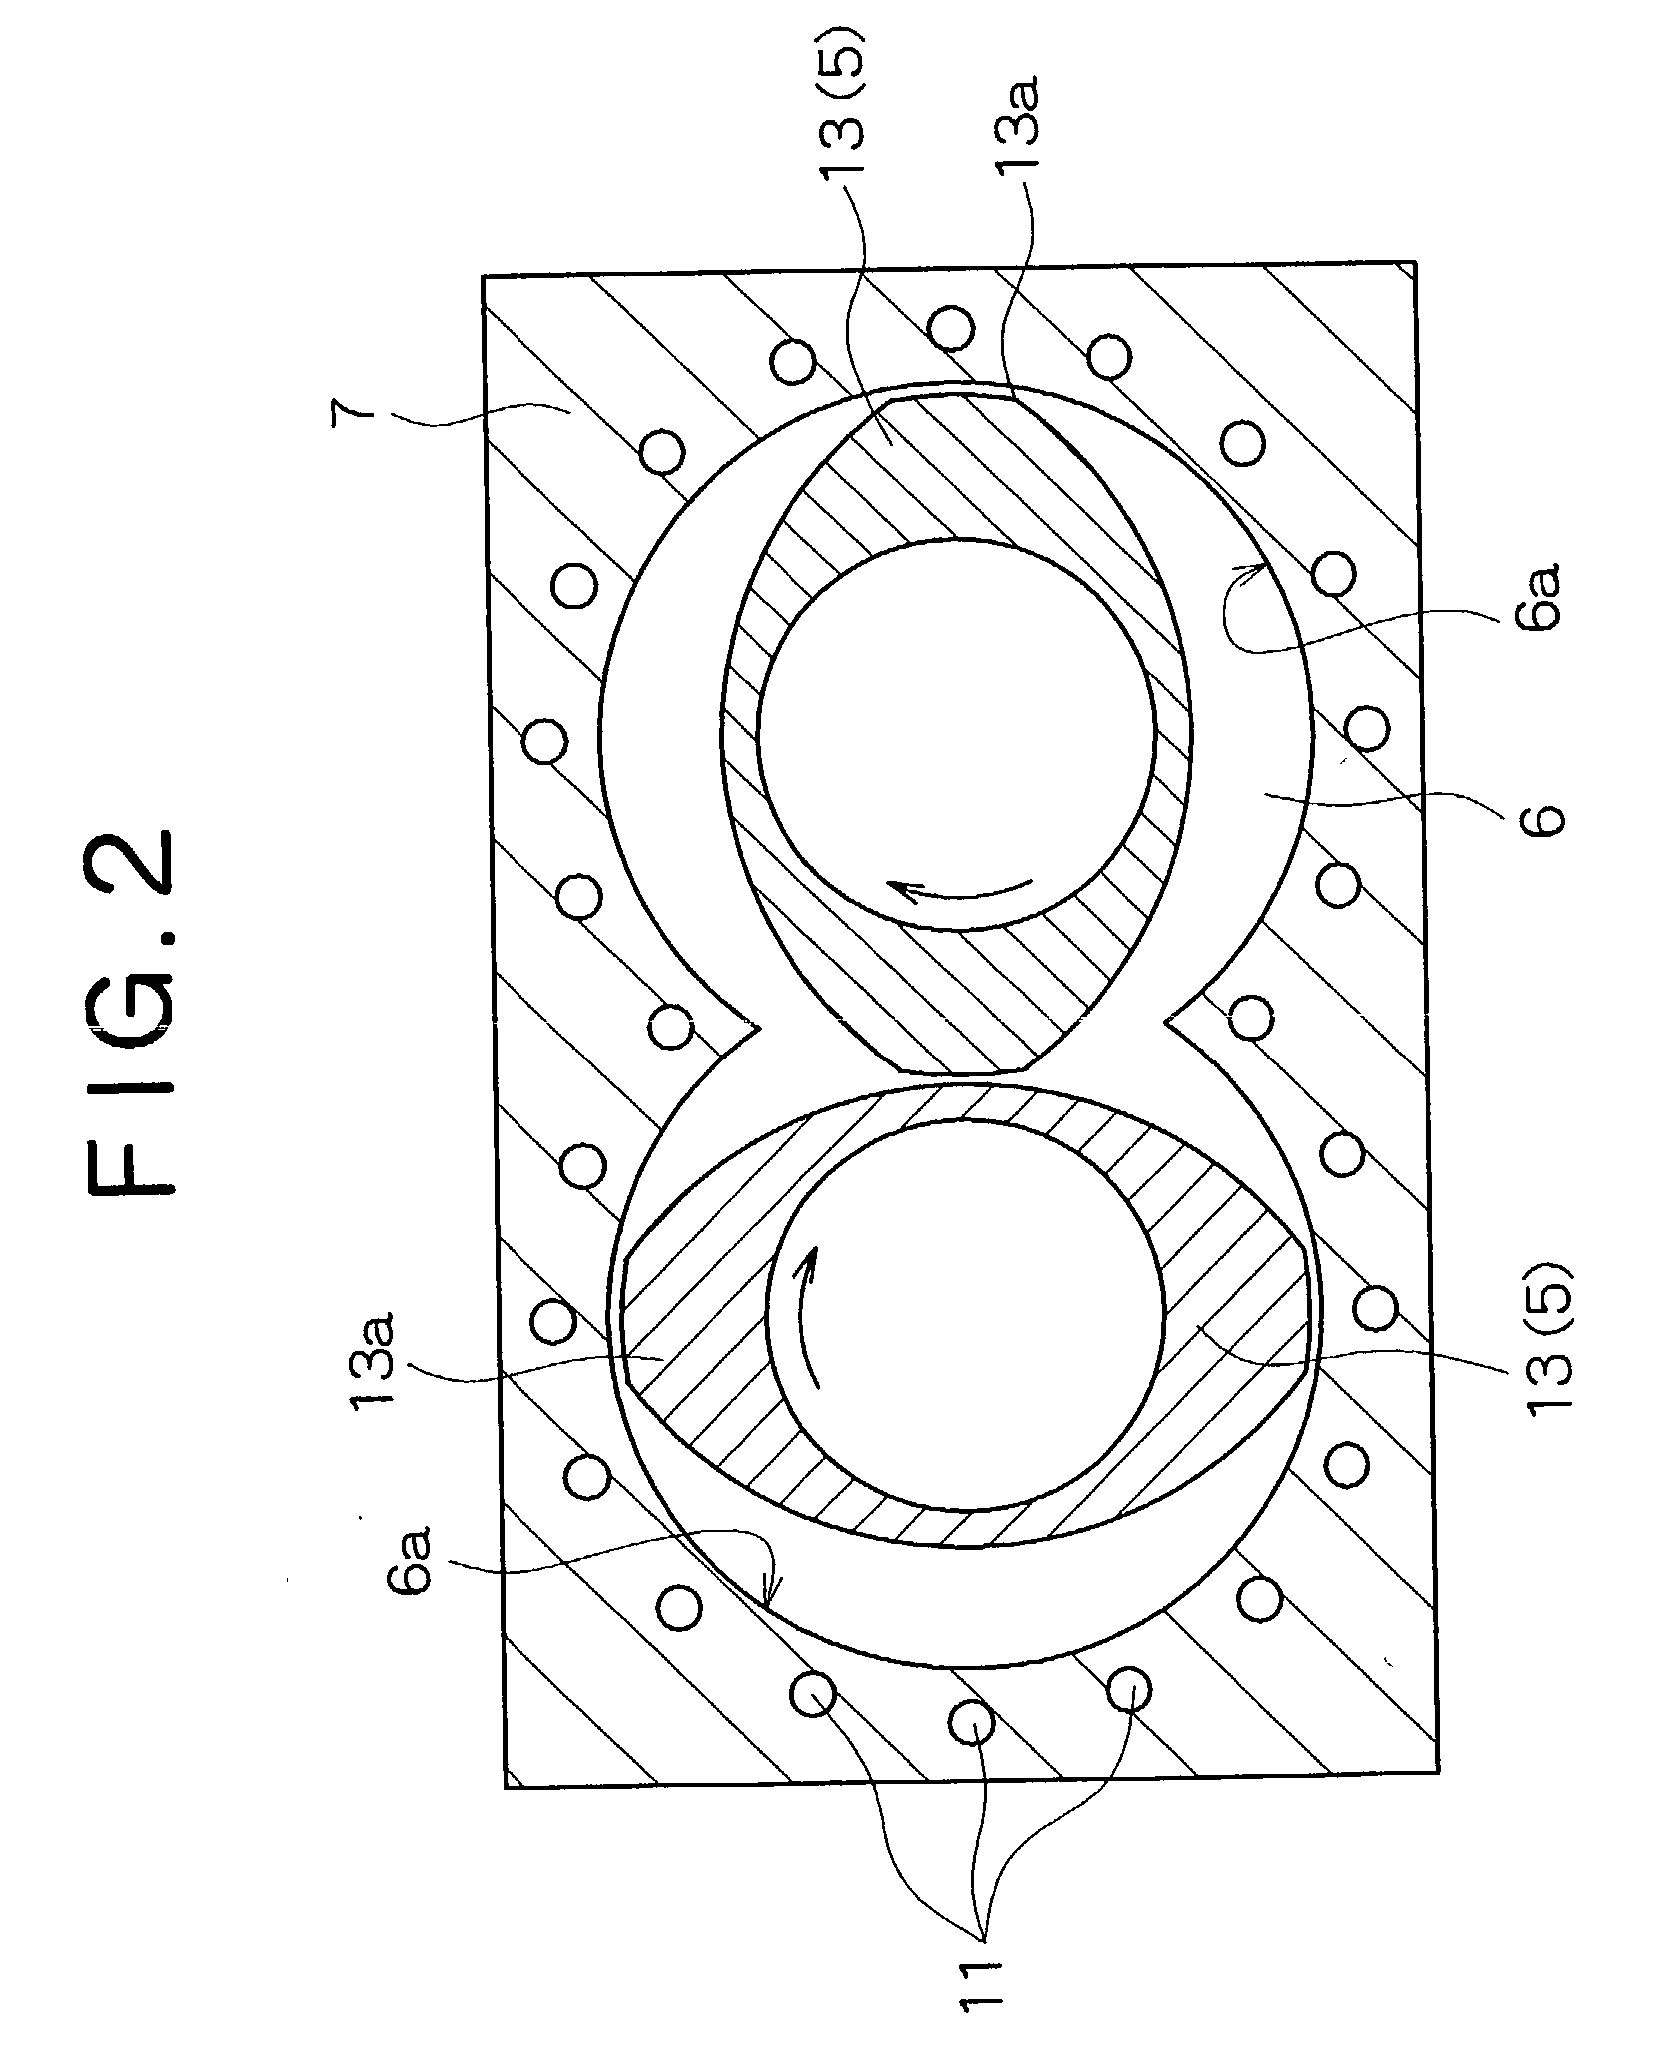 Kneading apparatus and method for kneading rubber or rubber composition